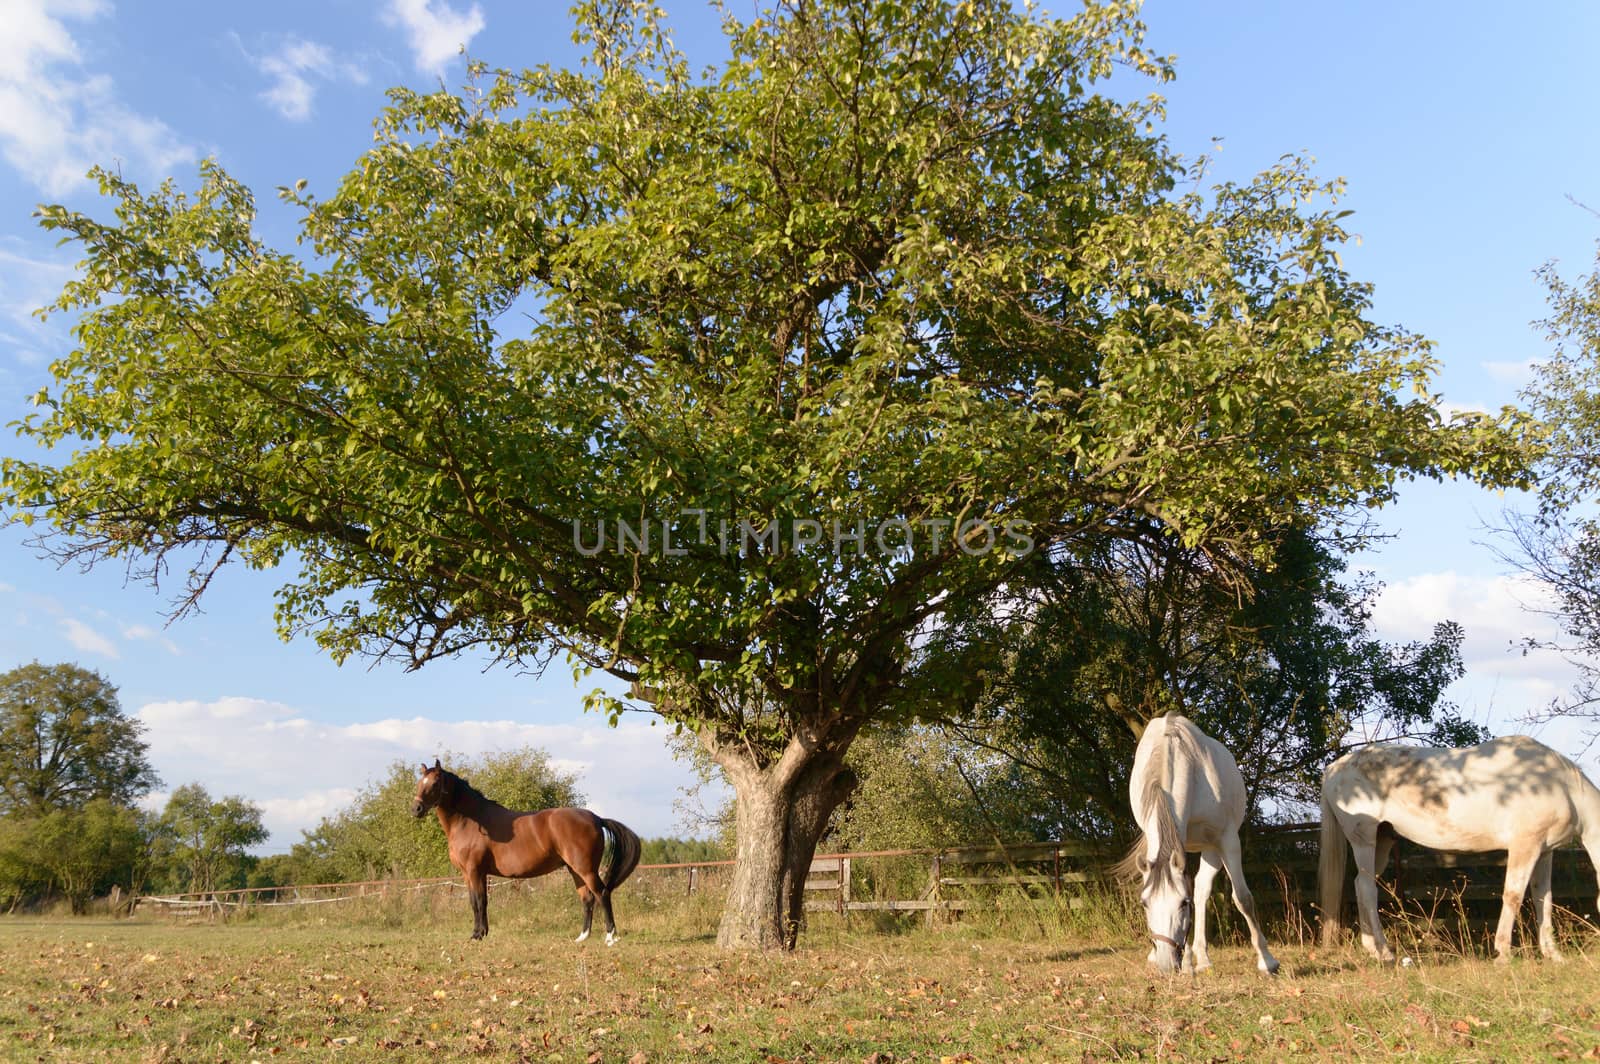 horse in a field, farm animals, nature series